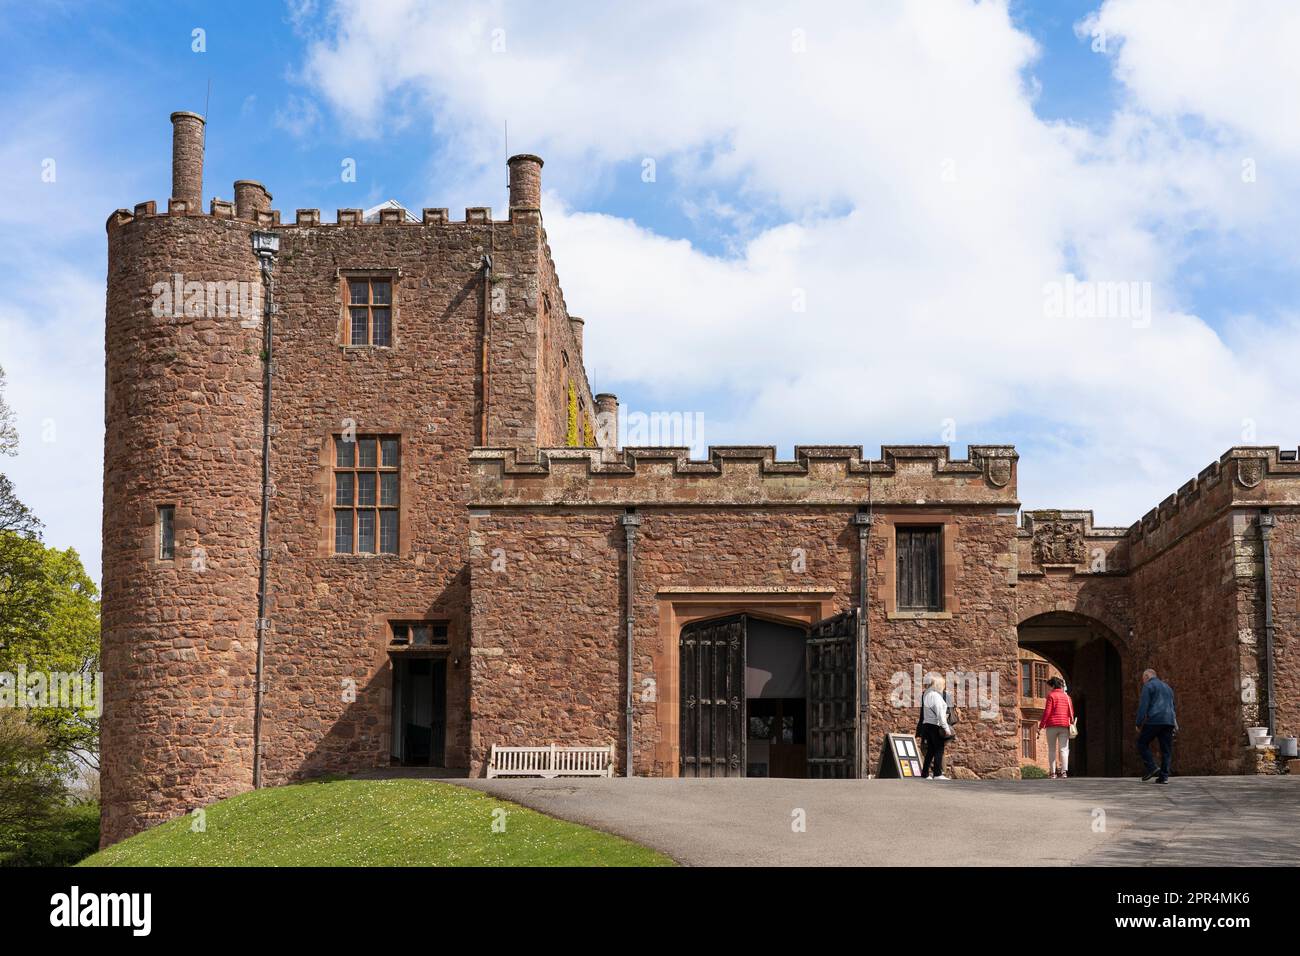 People entering the entrance to Powis Castle, a Grade 1 listed sandstone masonry medieval fortress and country house near Welshpool, Wales Stock Photo